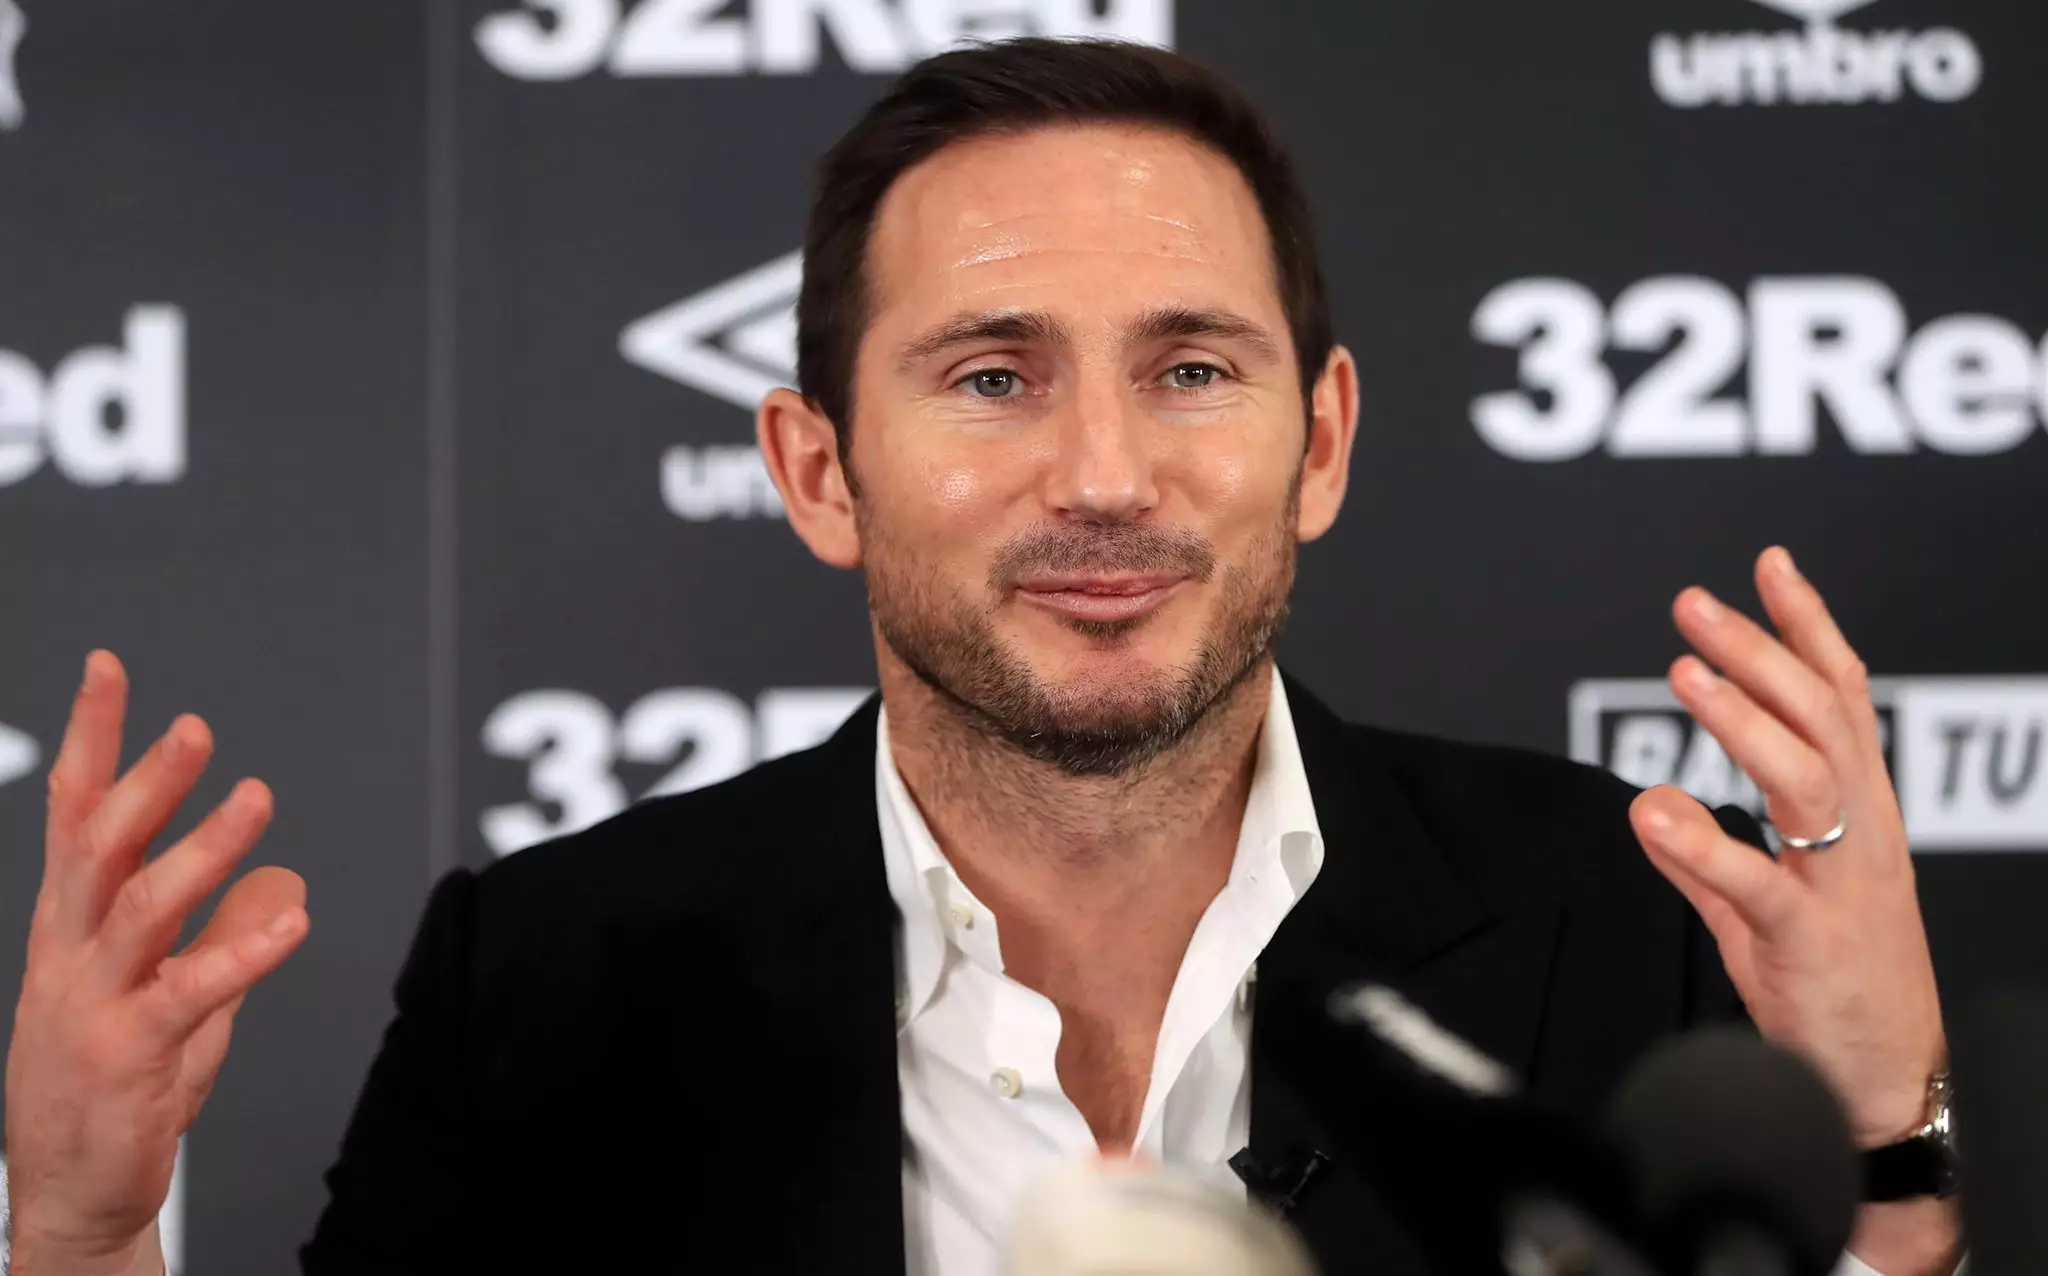 Lampard is the new manager of Derby. Image: PA Images